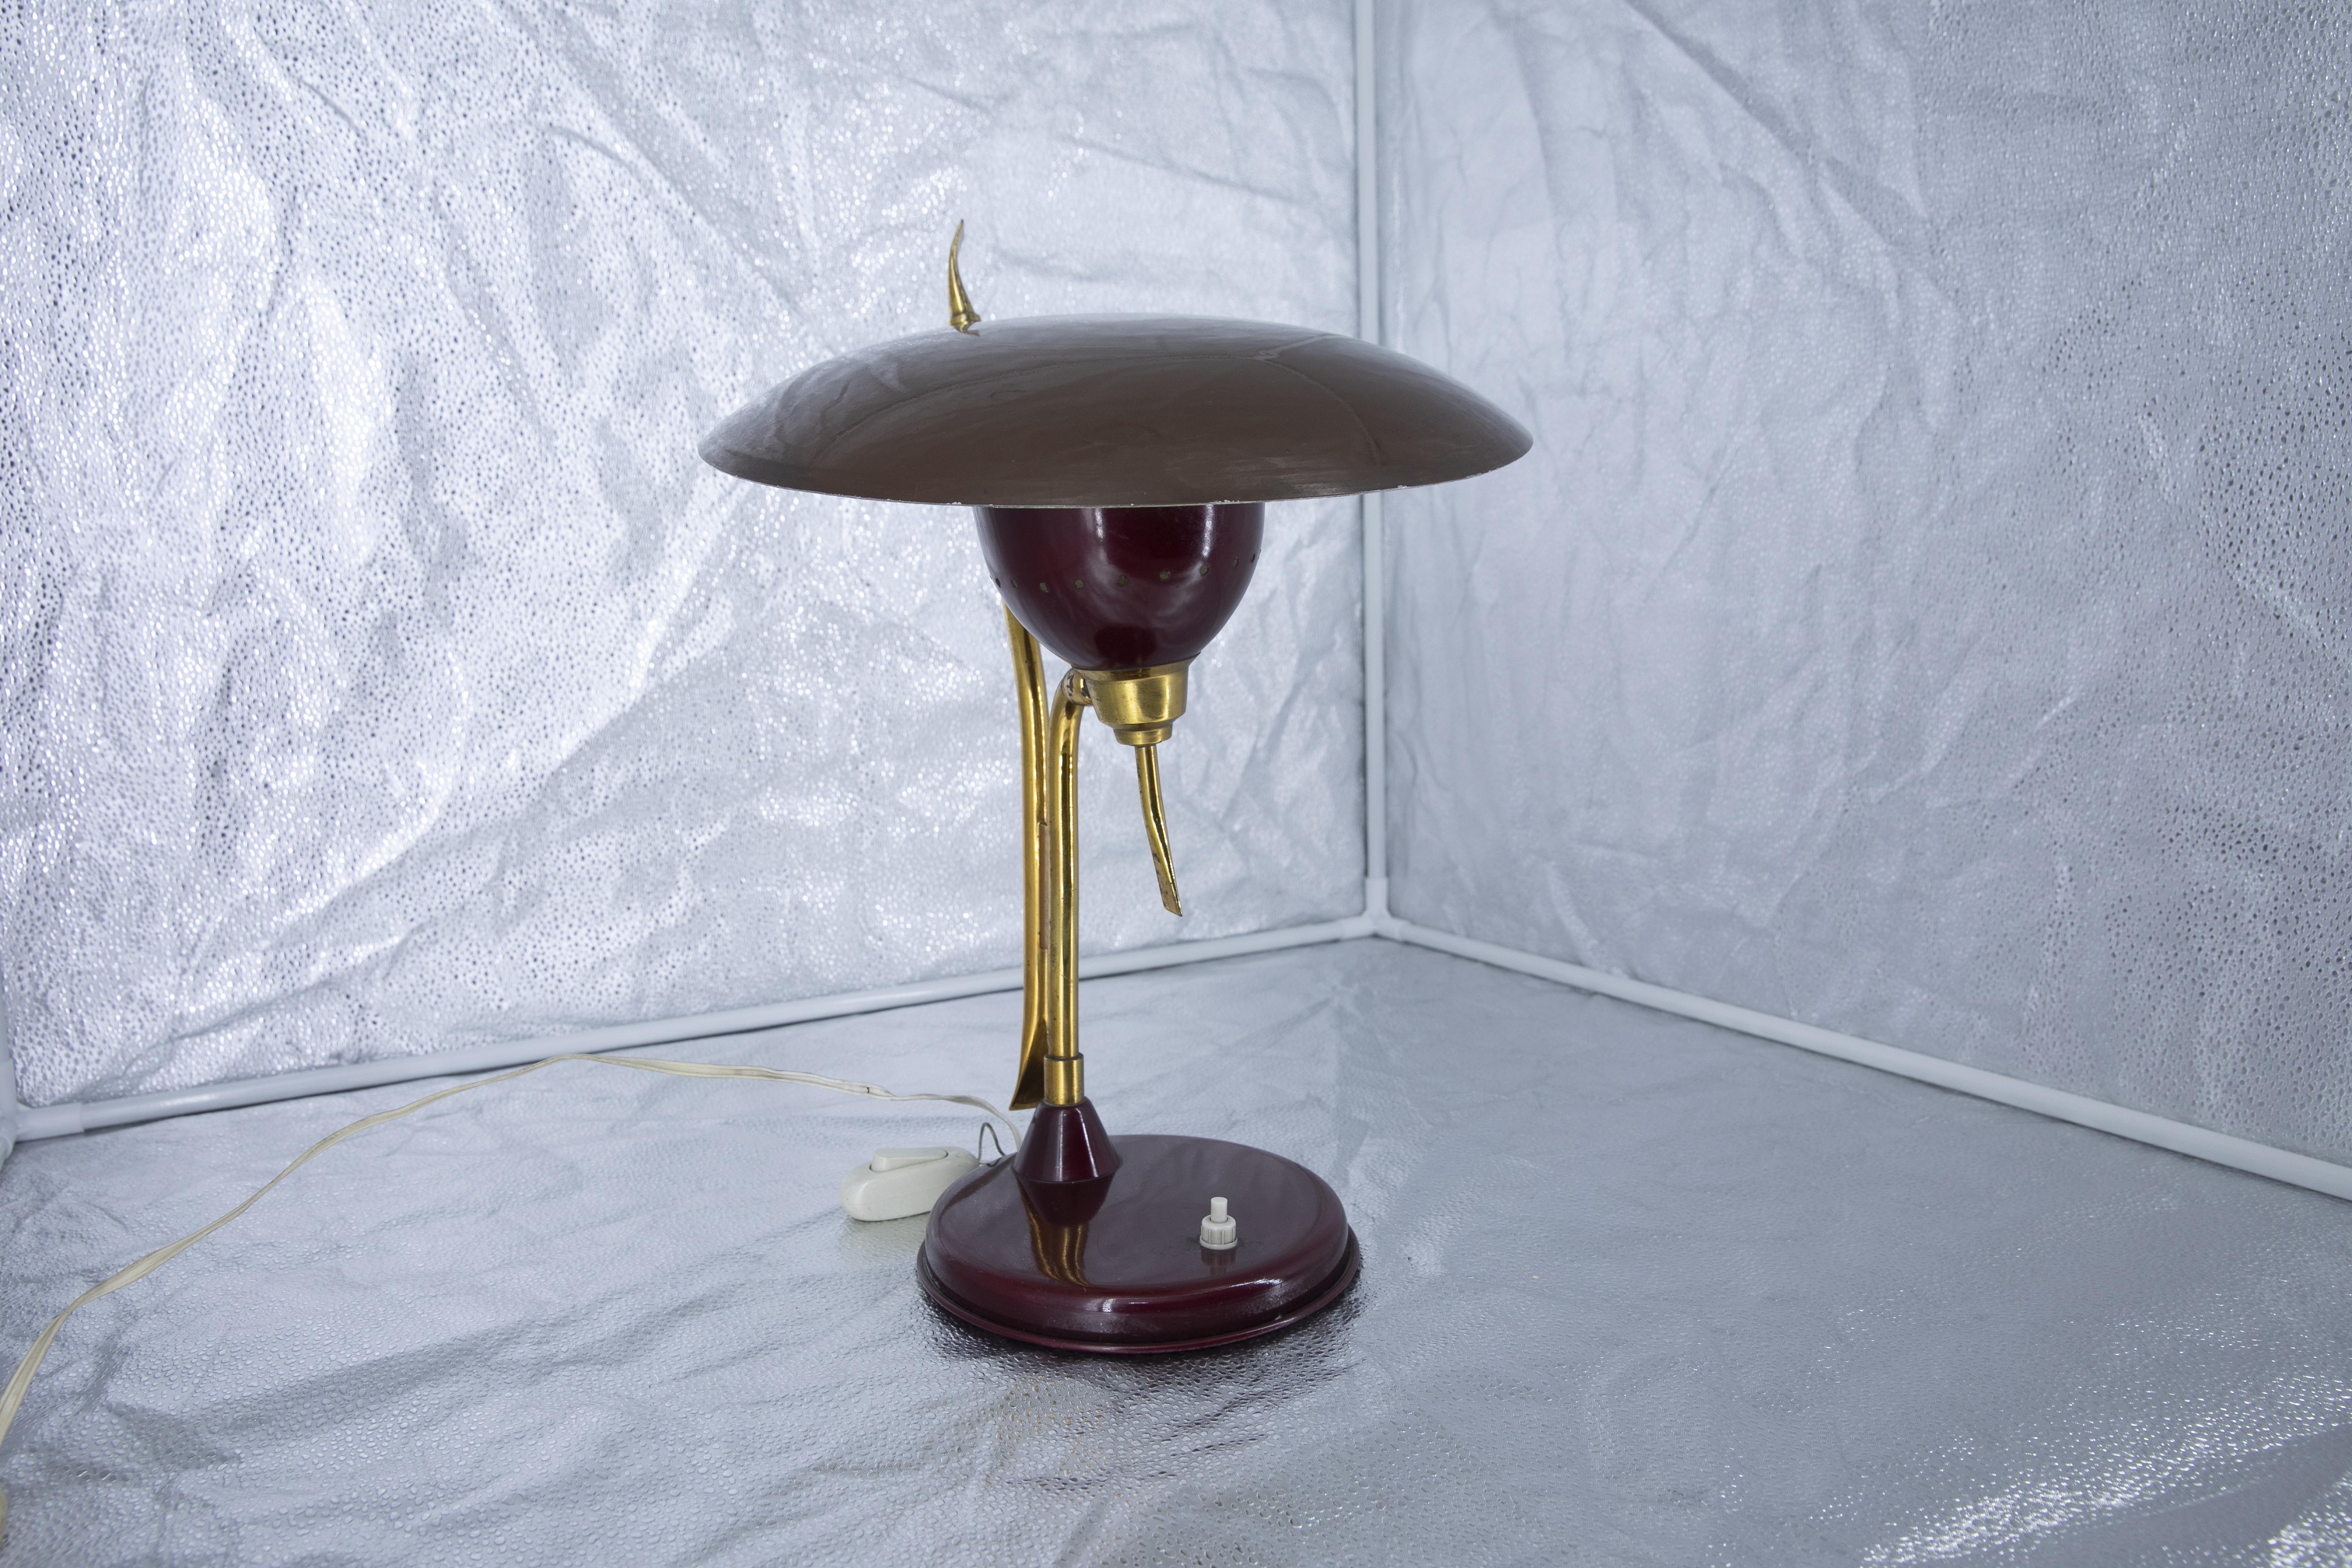 Brass Desk Table Lamp Design by Oscar Torlasco for Lumen Milano, Made in Italy, 1950s For Sale